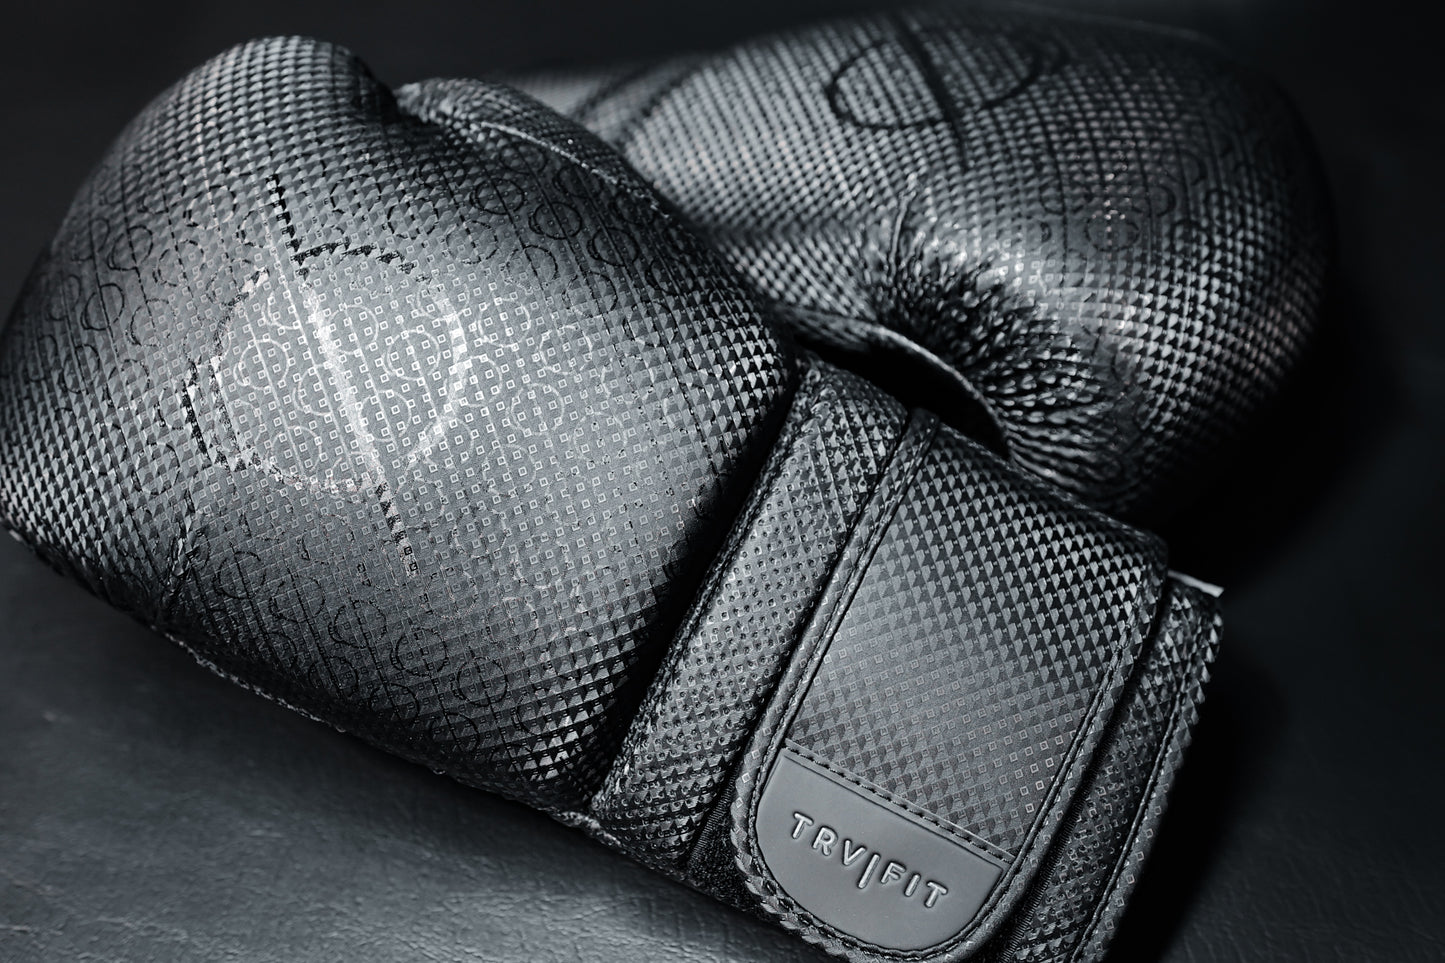 Limited Edition Black/Black Supreme Boxing Gloves (only 200 ever will –  TRVFIT Apparel